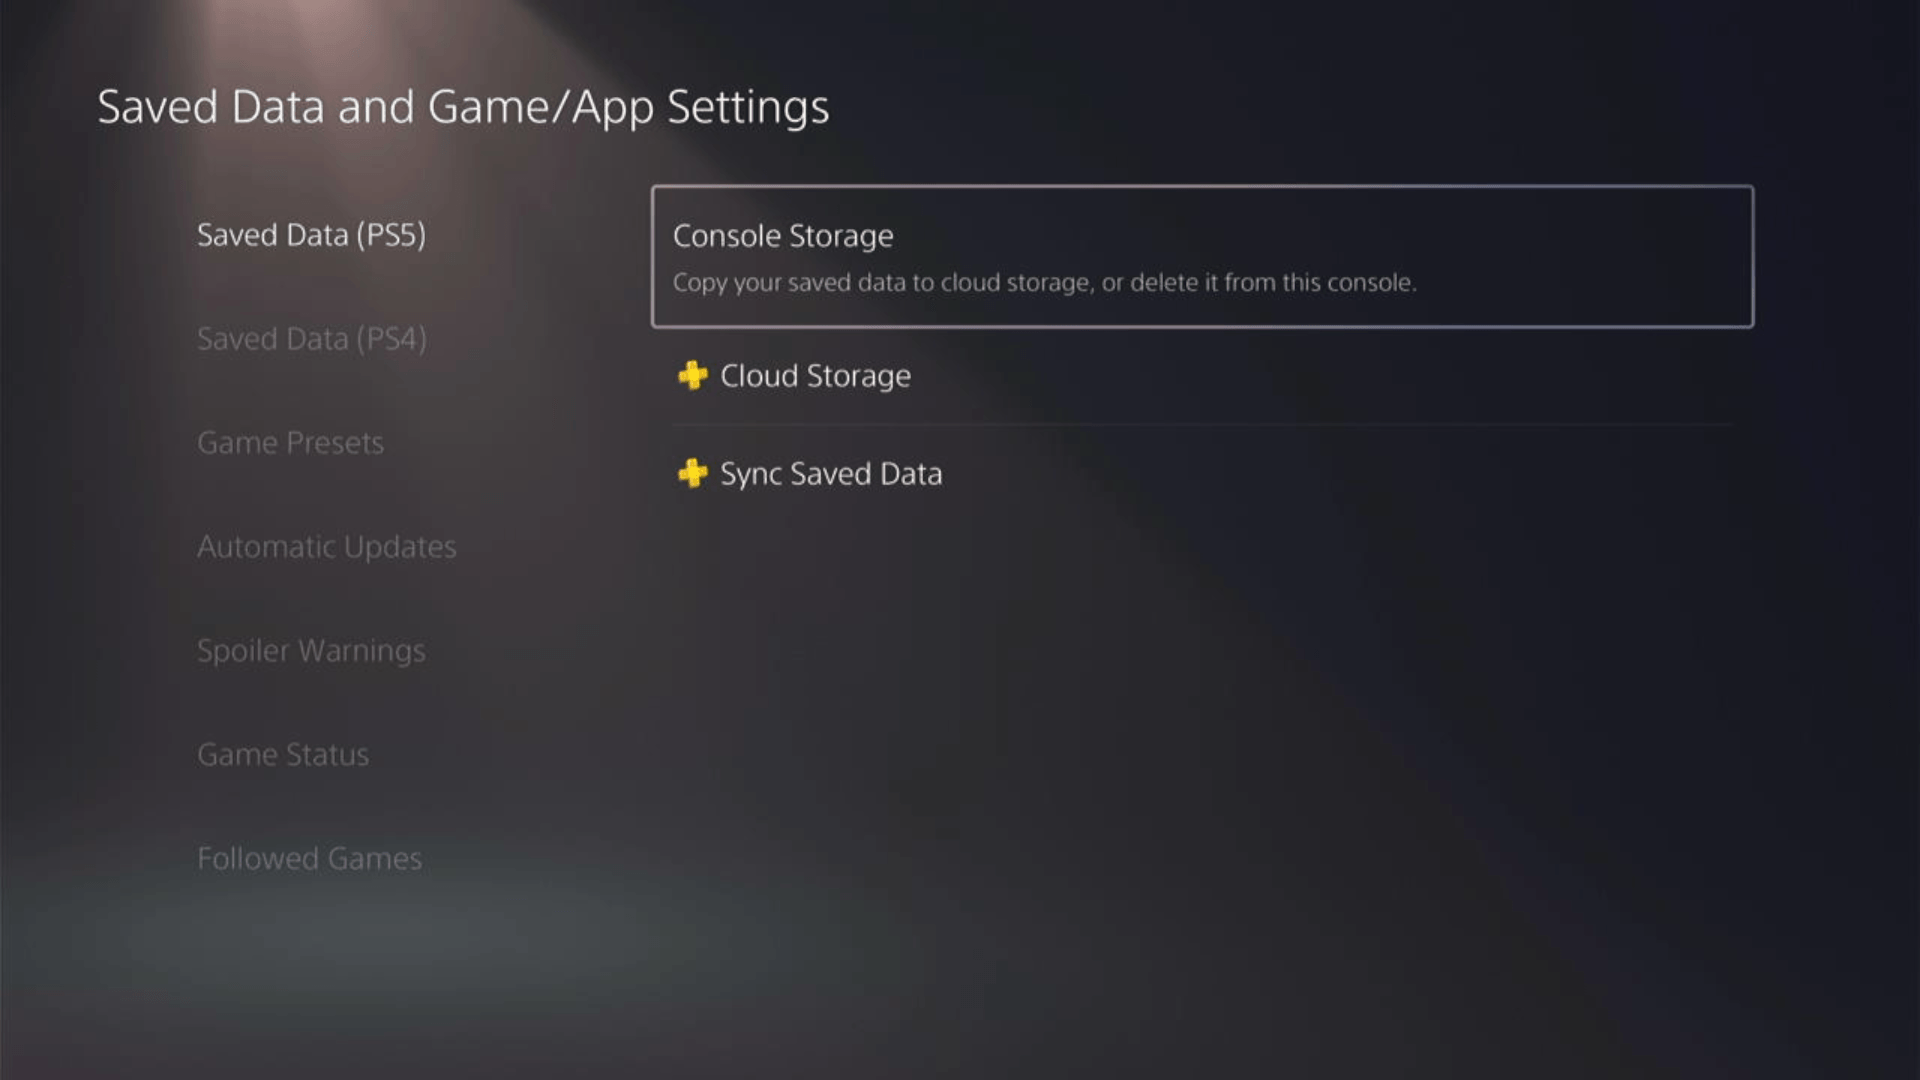 Saved Data and Game:App Settings Saved data for PS5 console storage to delete Minekos Night Market